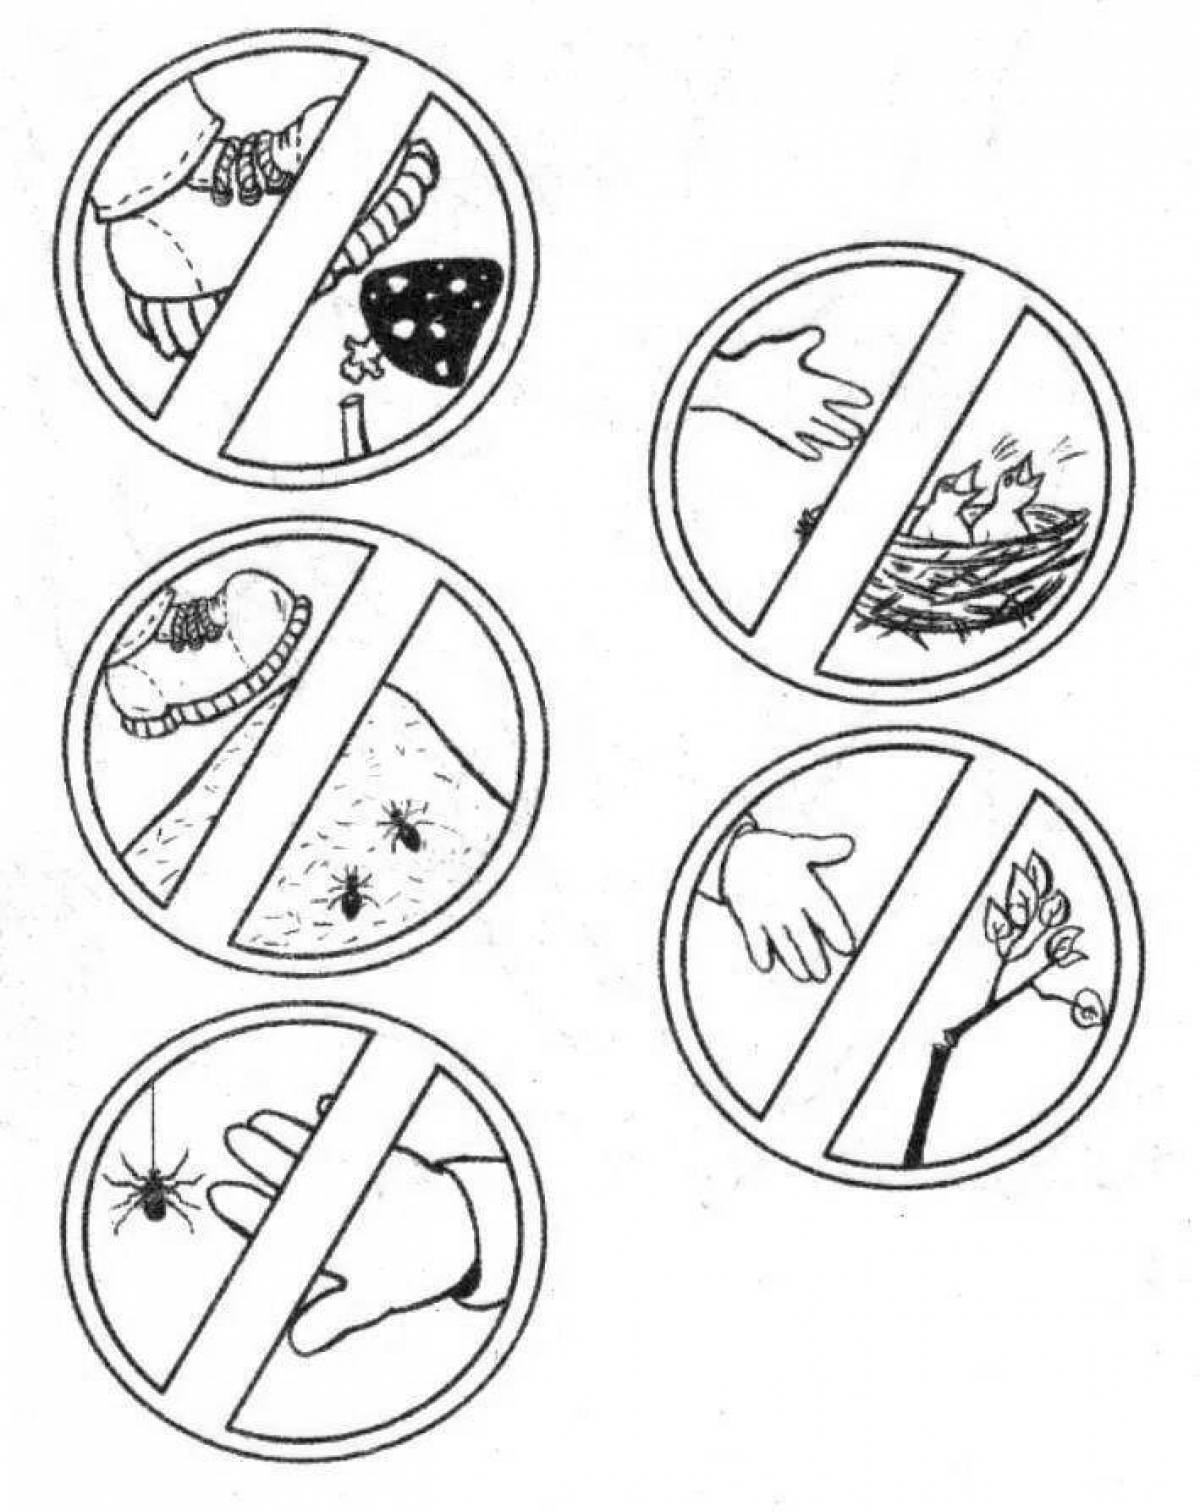 Coloring book majestic rules of behavior in the forest